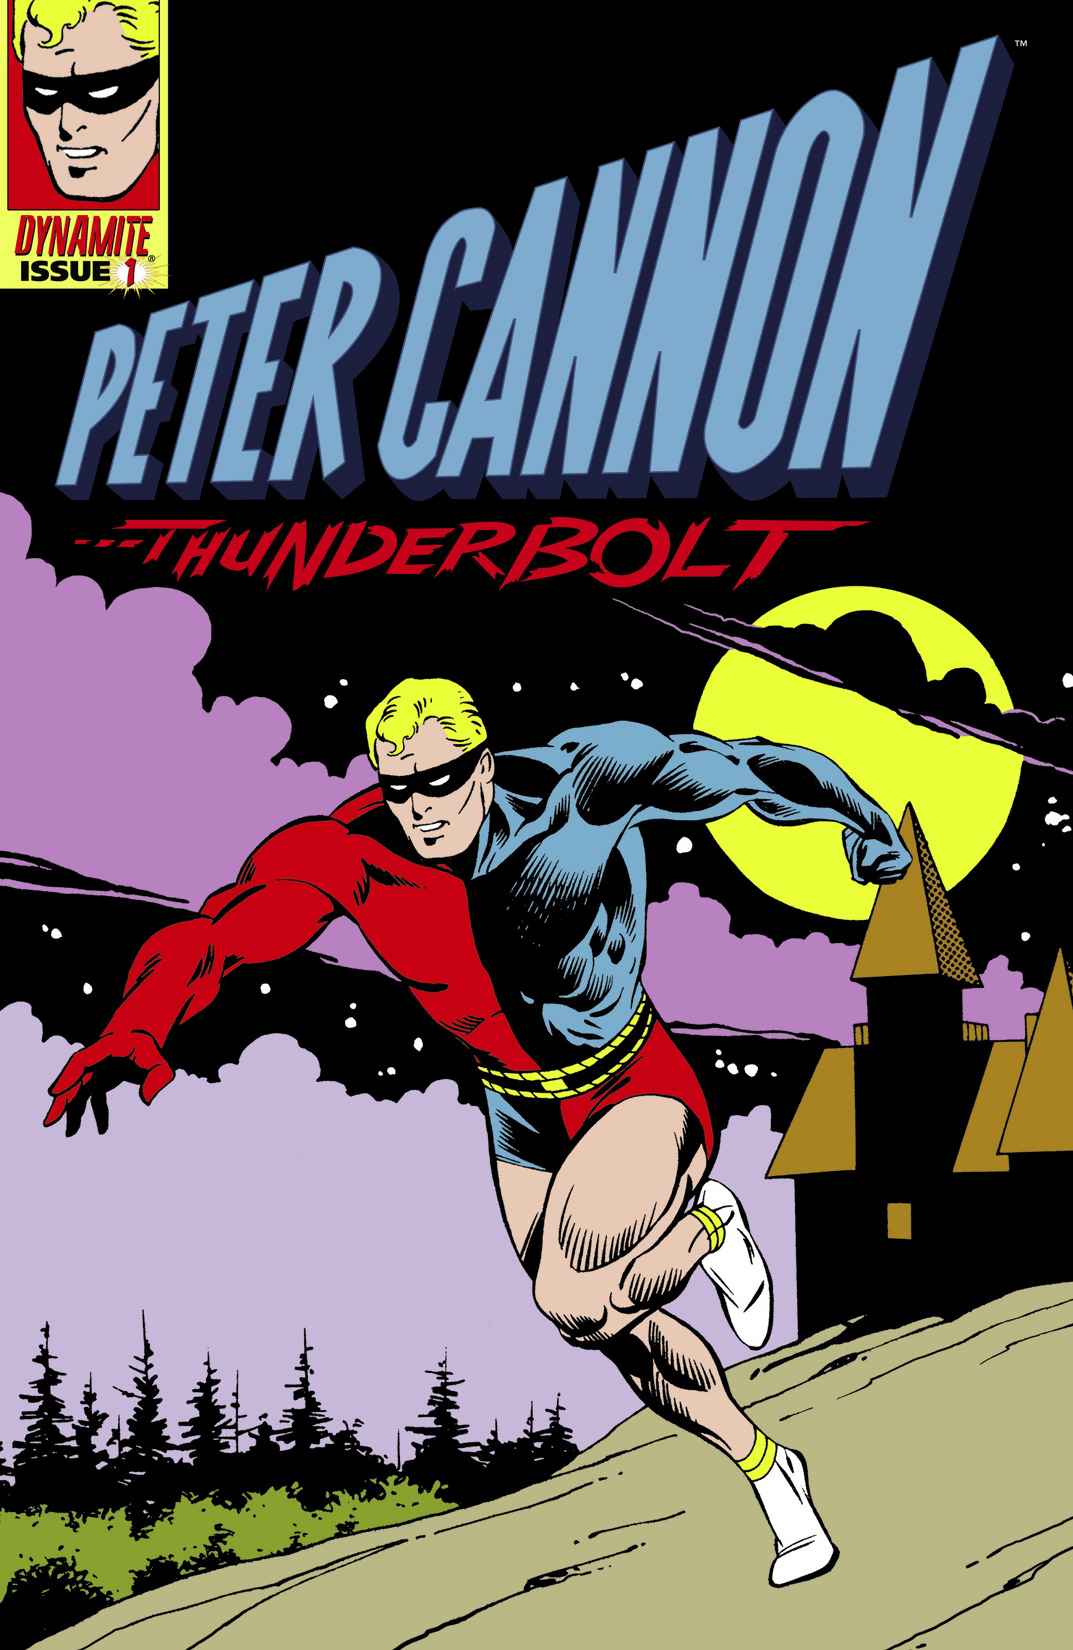 Read online Peter Cannon: Thunderbolt comic -  Issue #1 - 5